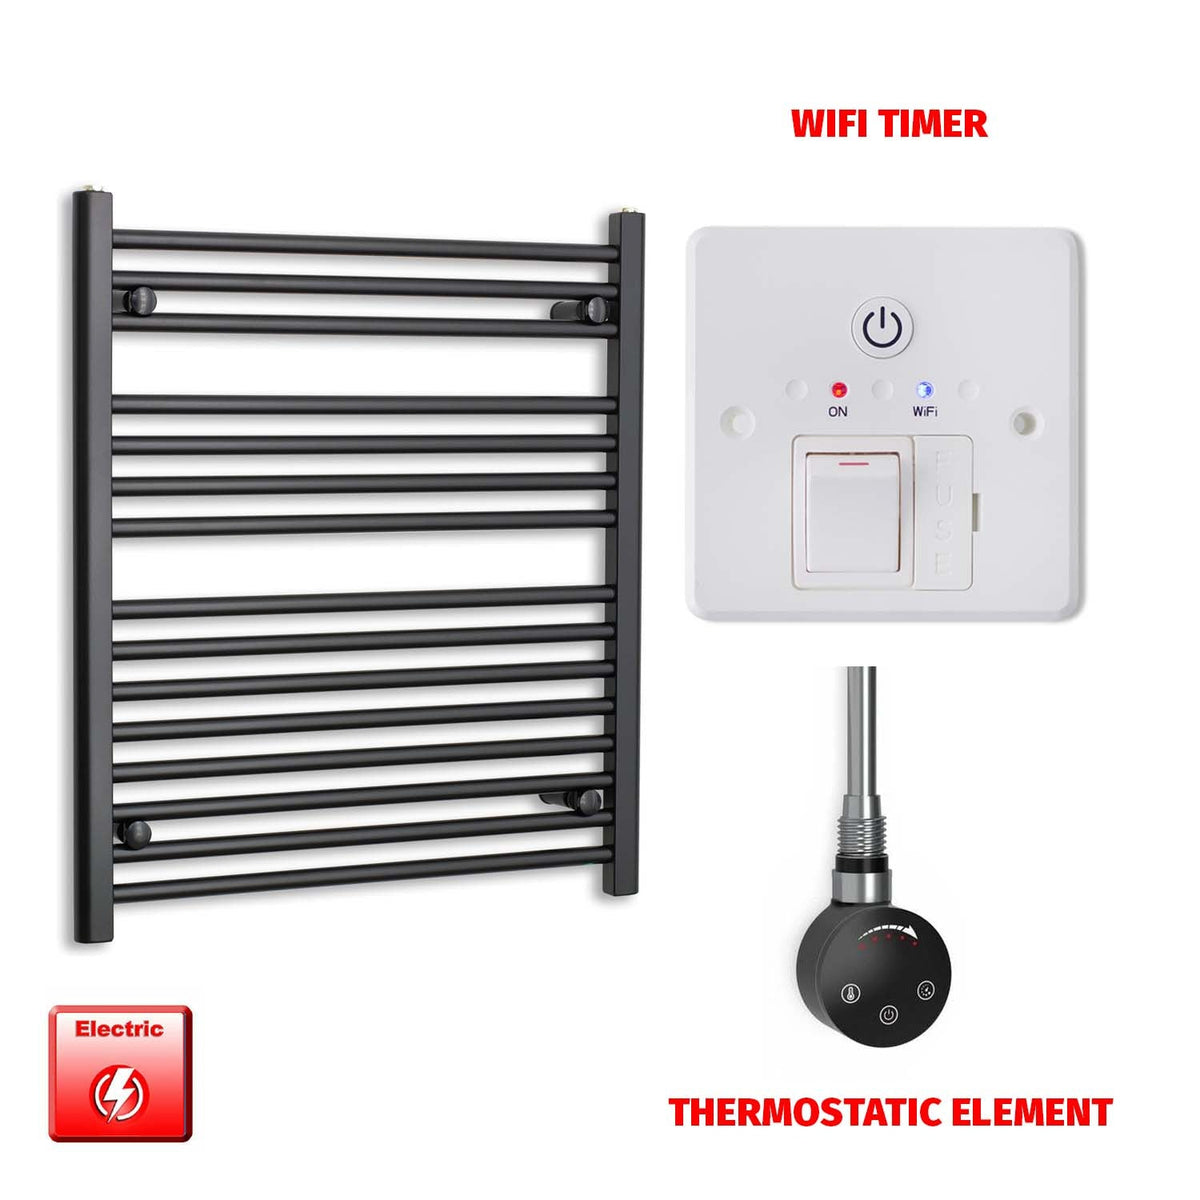 800 x 700 Flat Black Pre-Filled Electric Heated Towel Radiator HTR Smart Thermostatic Wifi Timer